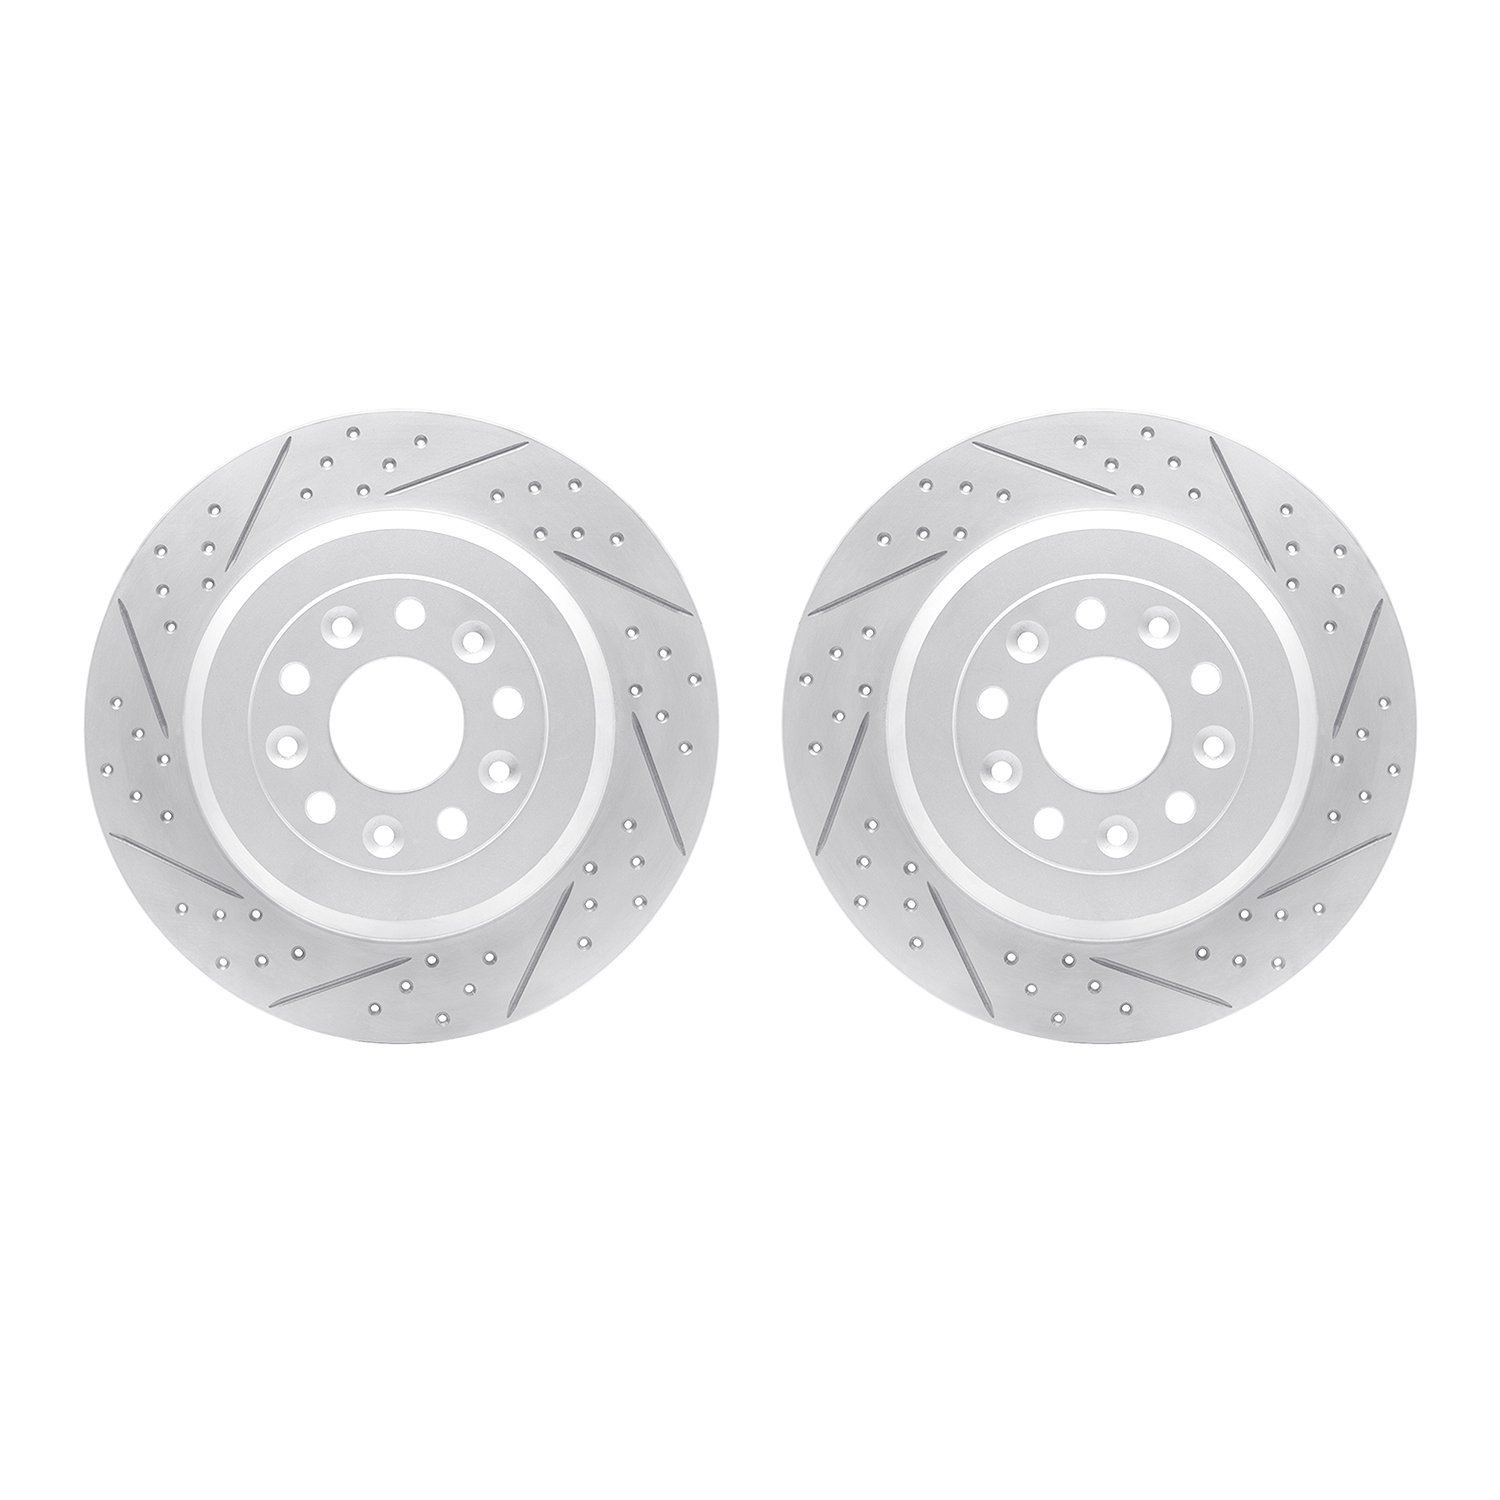 2002-54130 Geoperformance Drilled/Slotted Brake Rotors, 2005-2019 Ford/Lincoln/Mercury/Mazda, Position: Rear